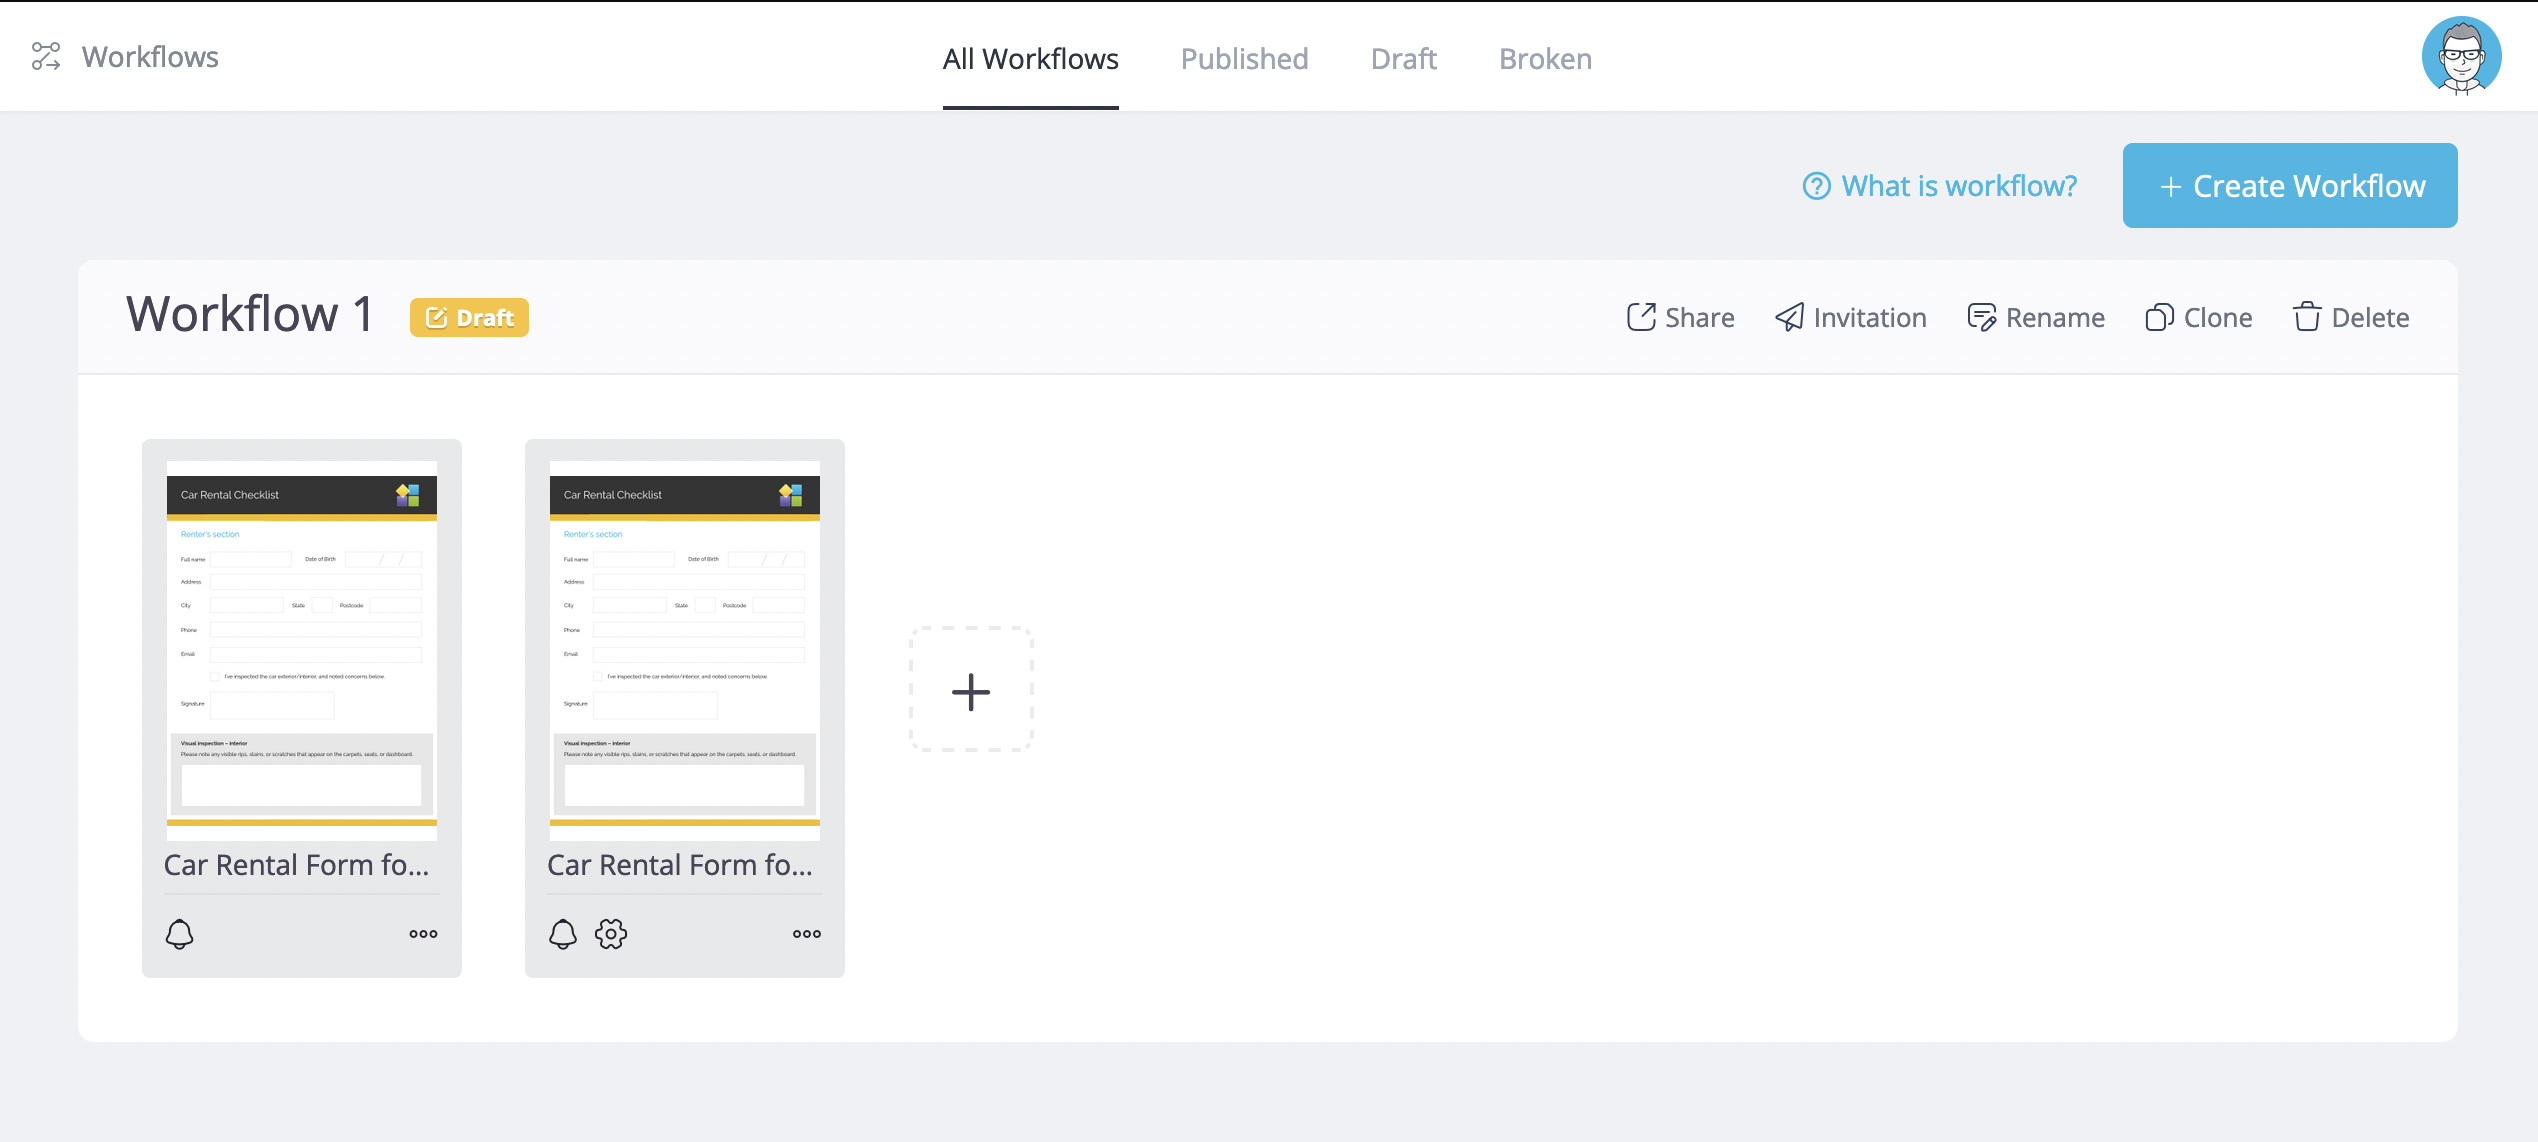 Introduce the Workflows page